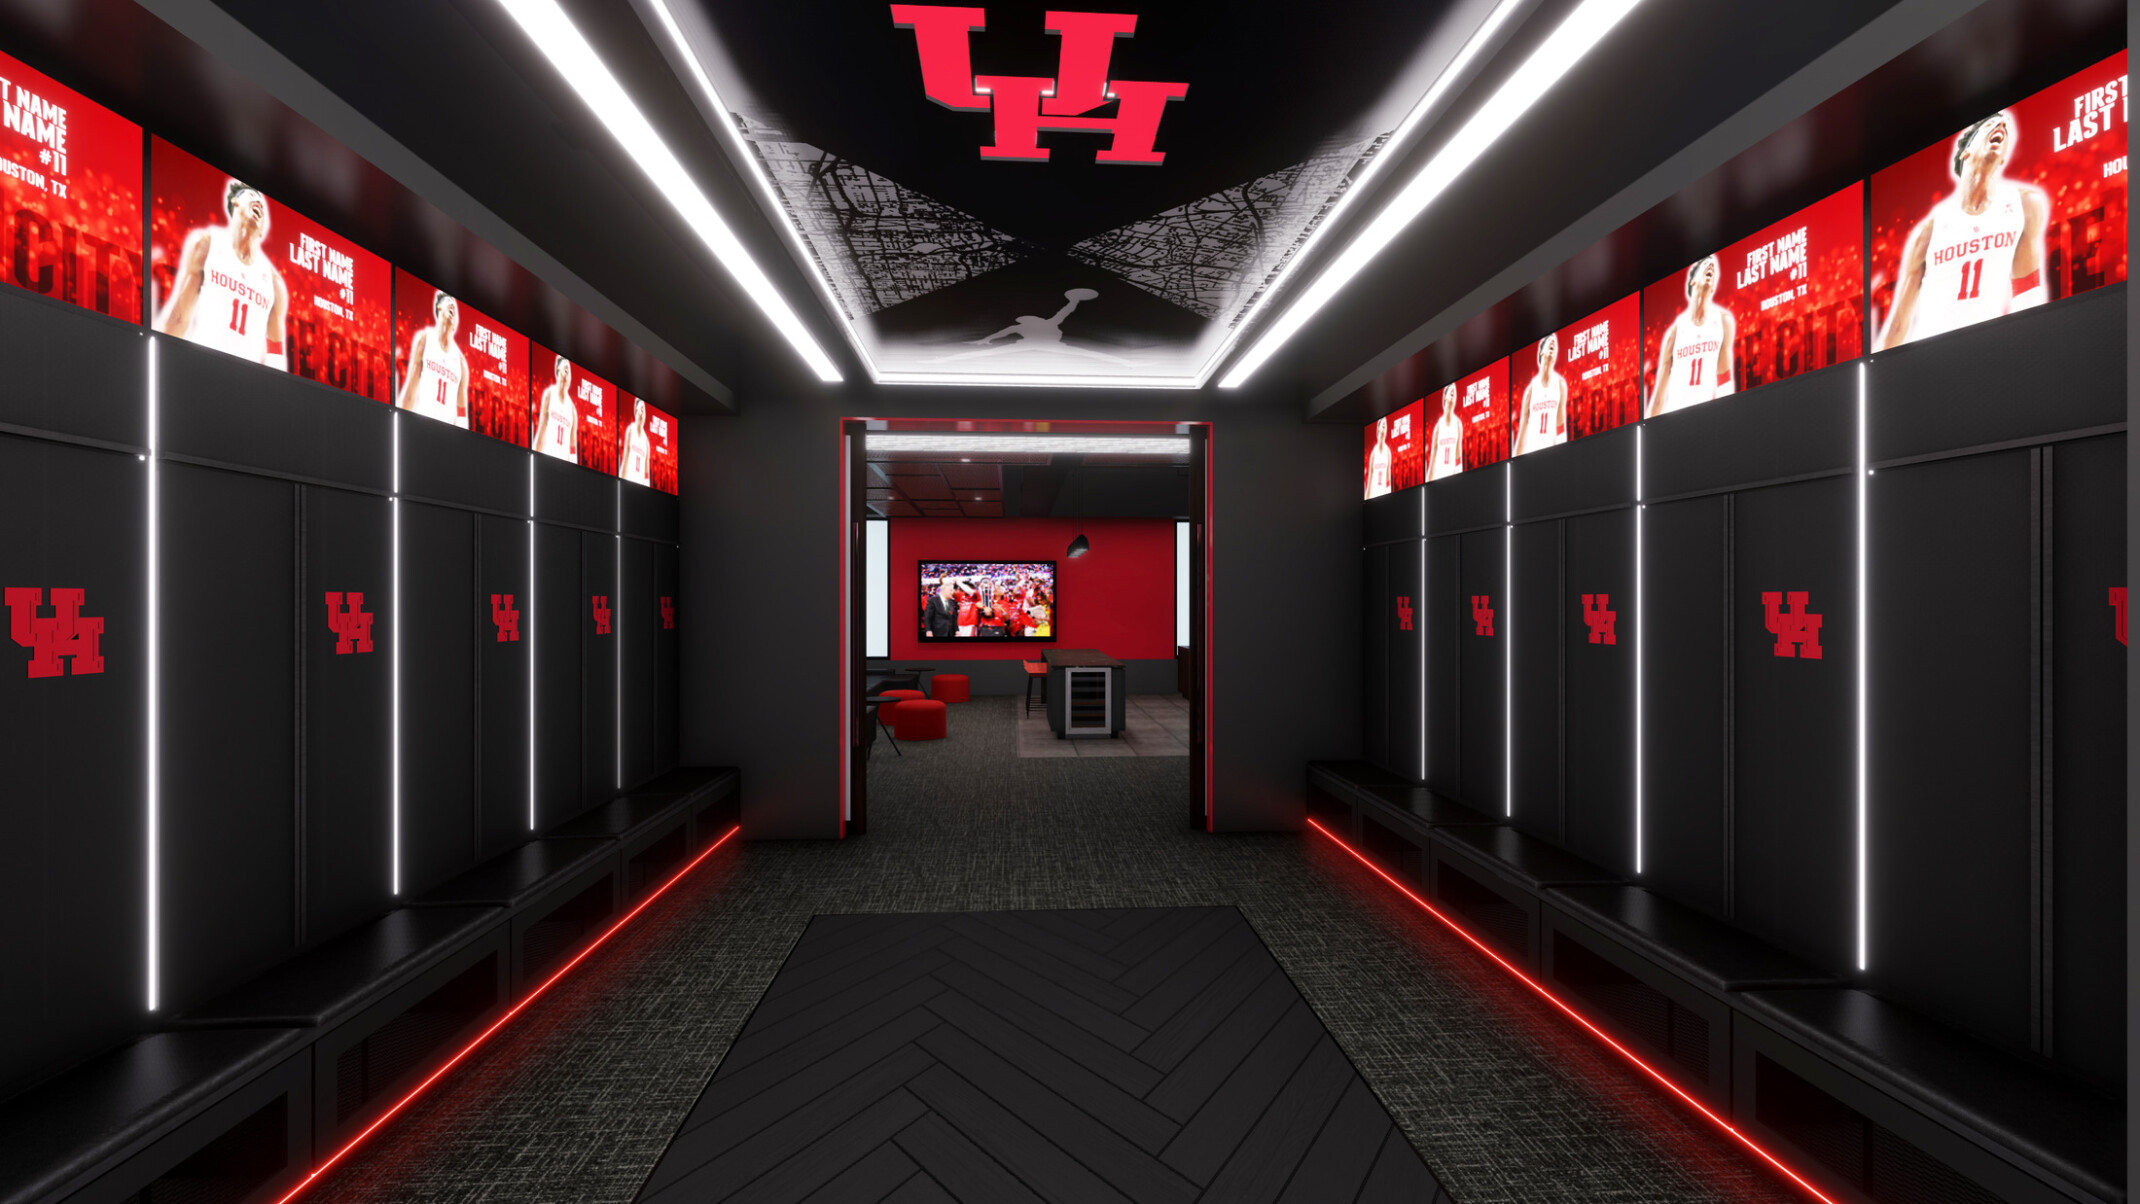 Basketball locker room with black walls and floors and red lighting throughout